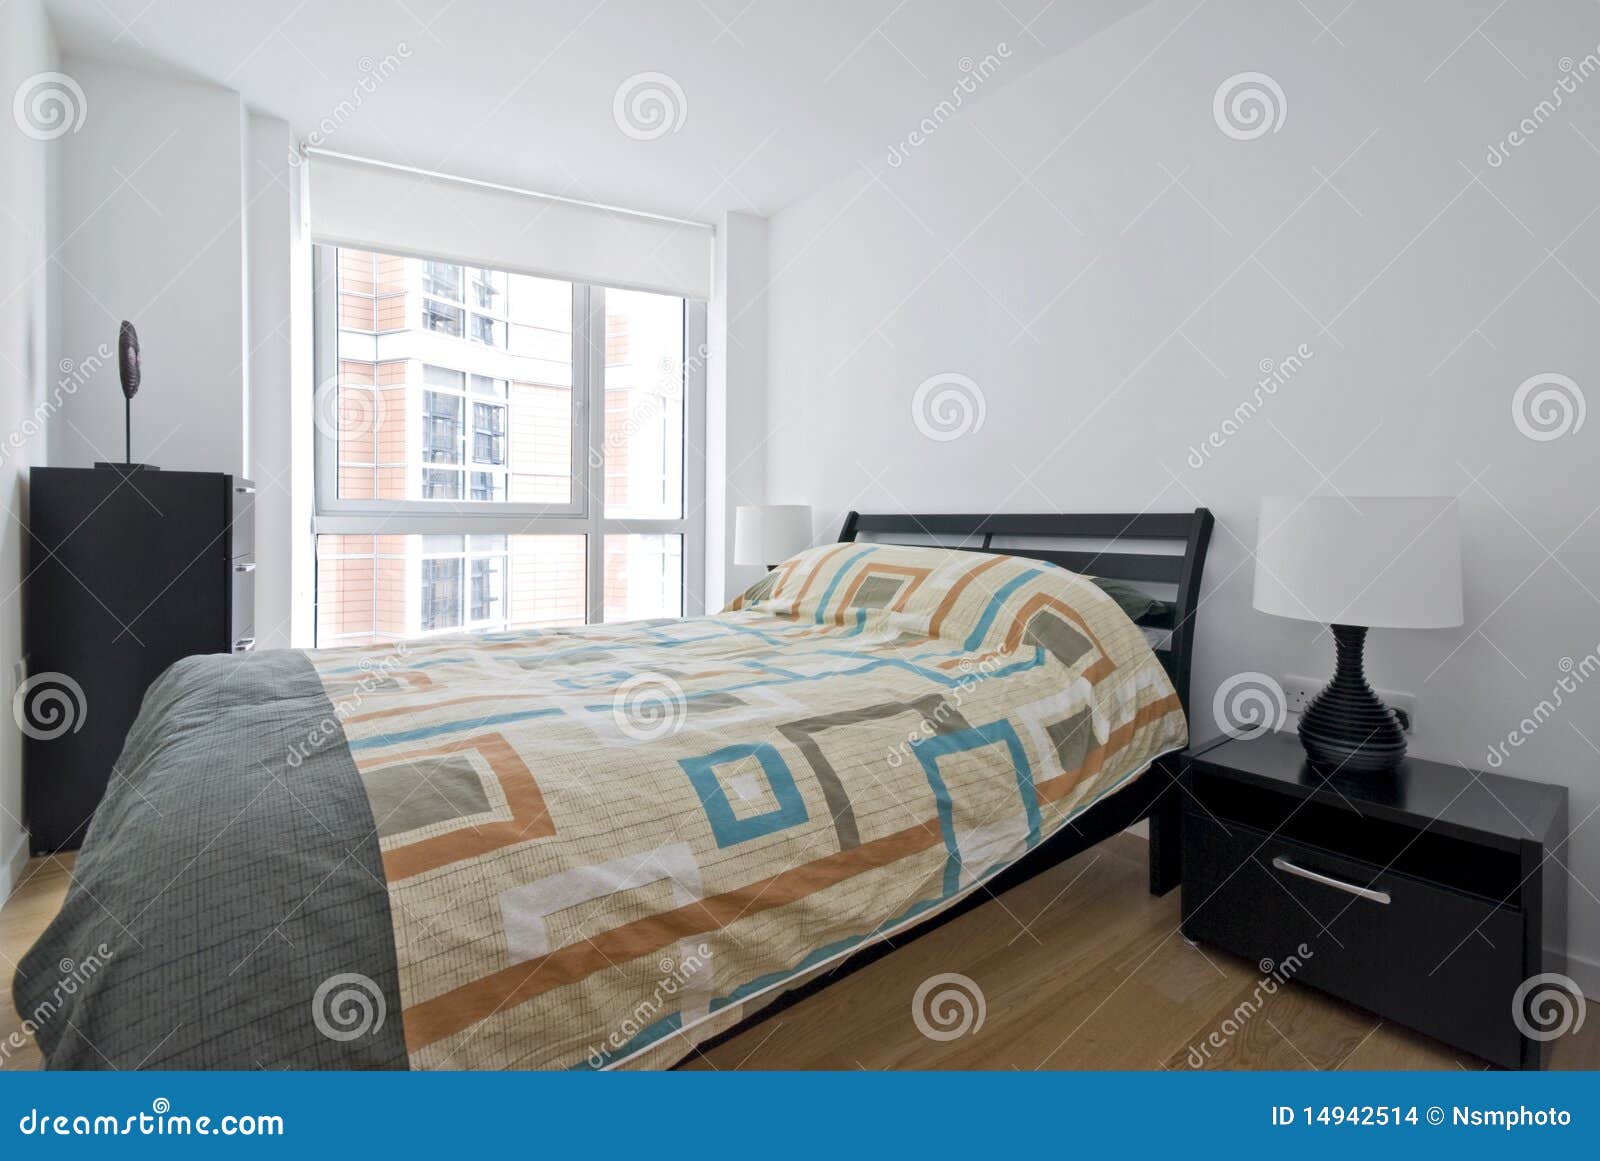 Modern Double Bedroom With King Size Bed Stock Photo Image